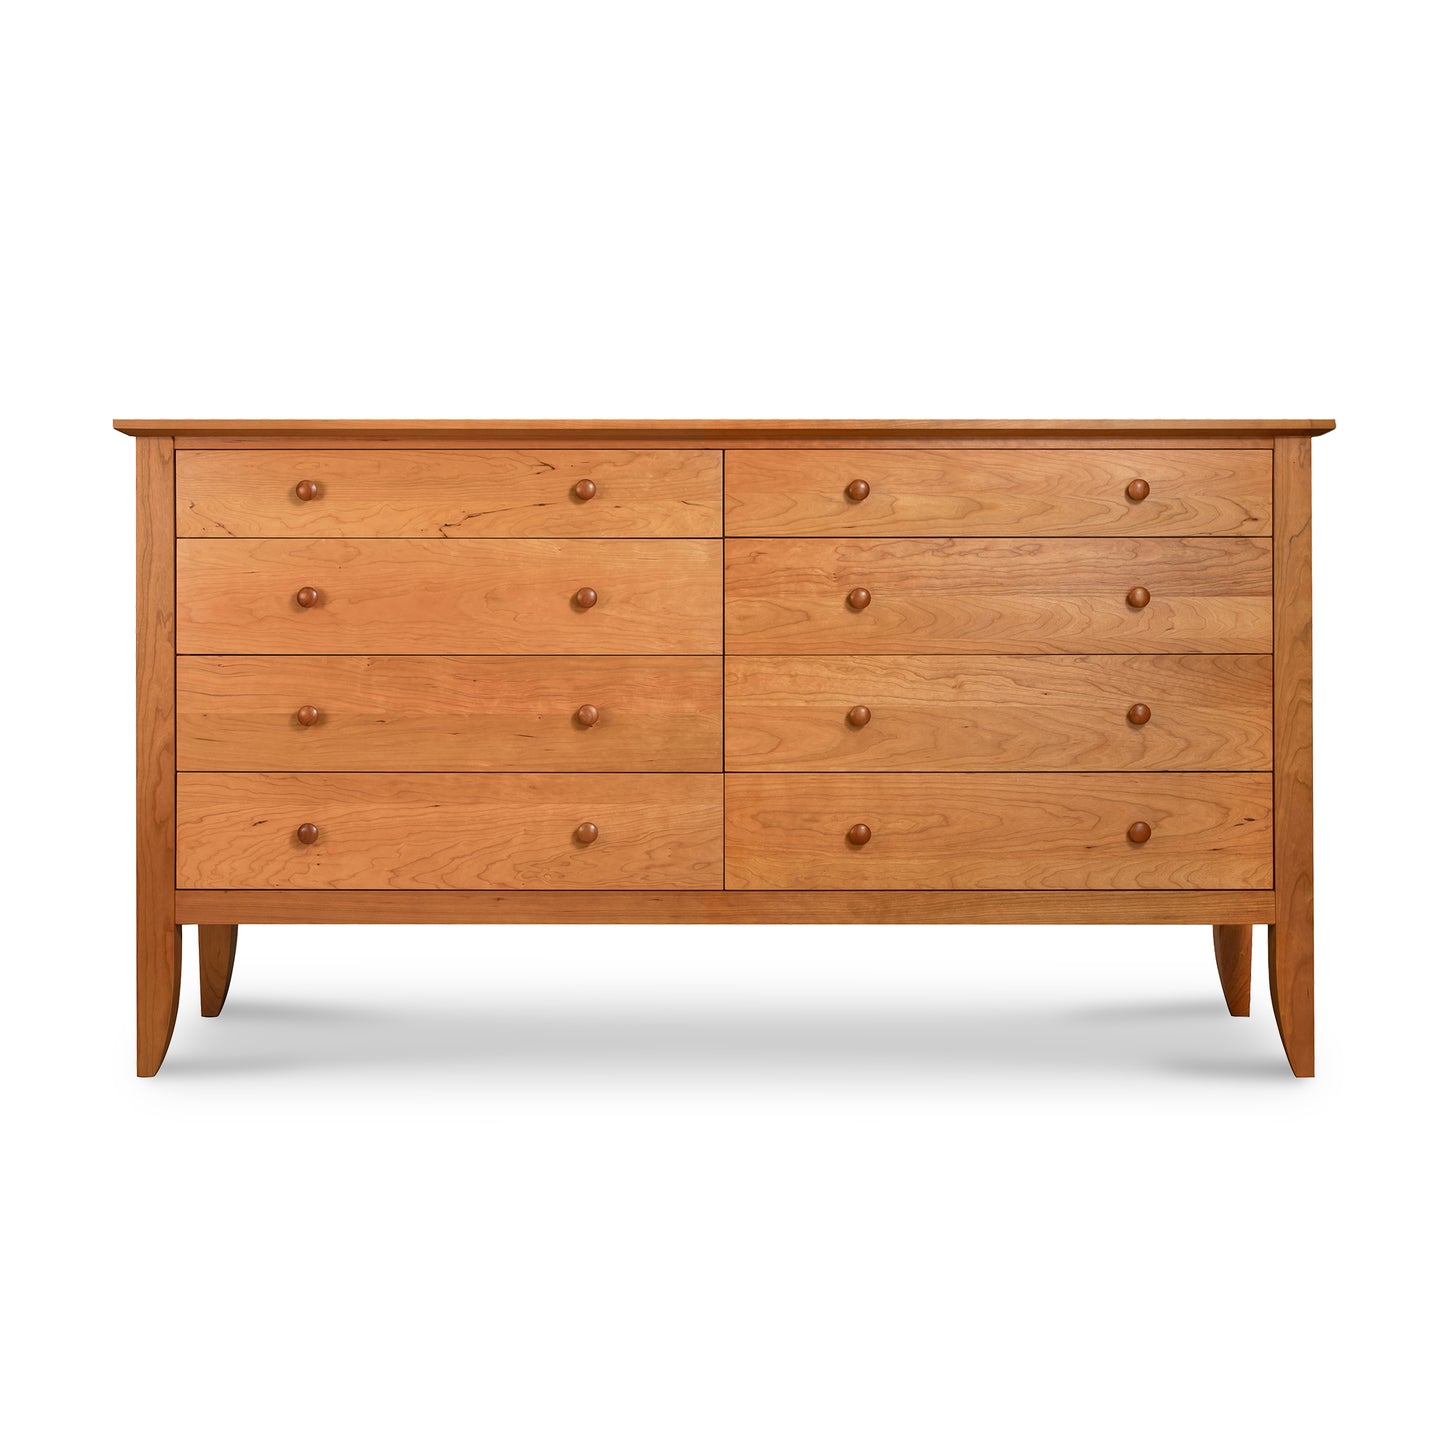 A Bow Front 8-Drawer Dresser by Lyndon Furniture with drawers on a white background.